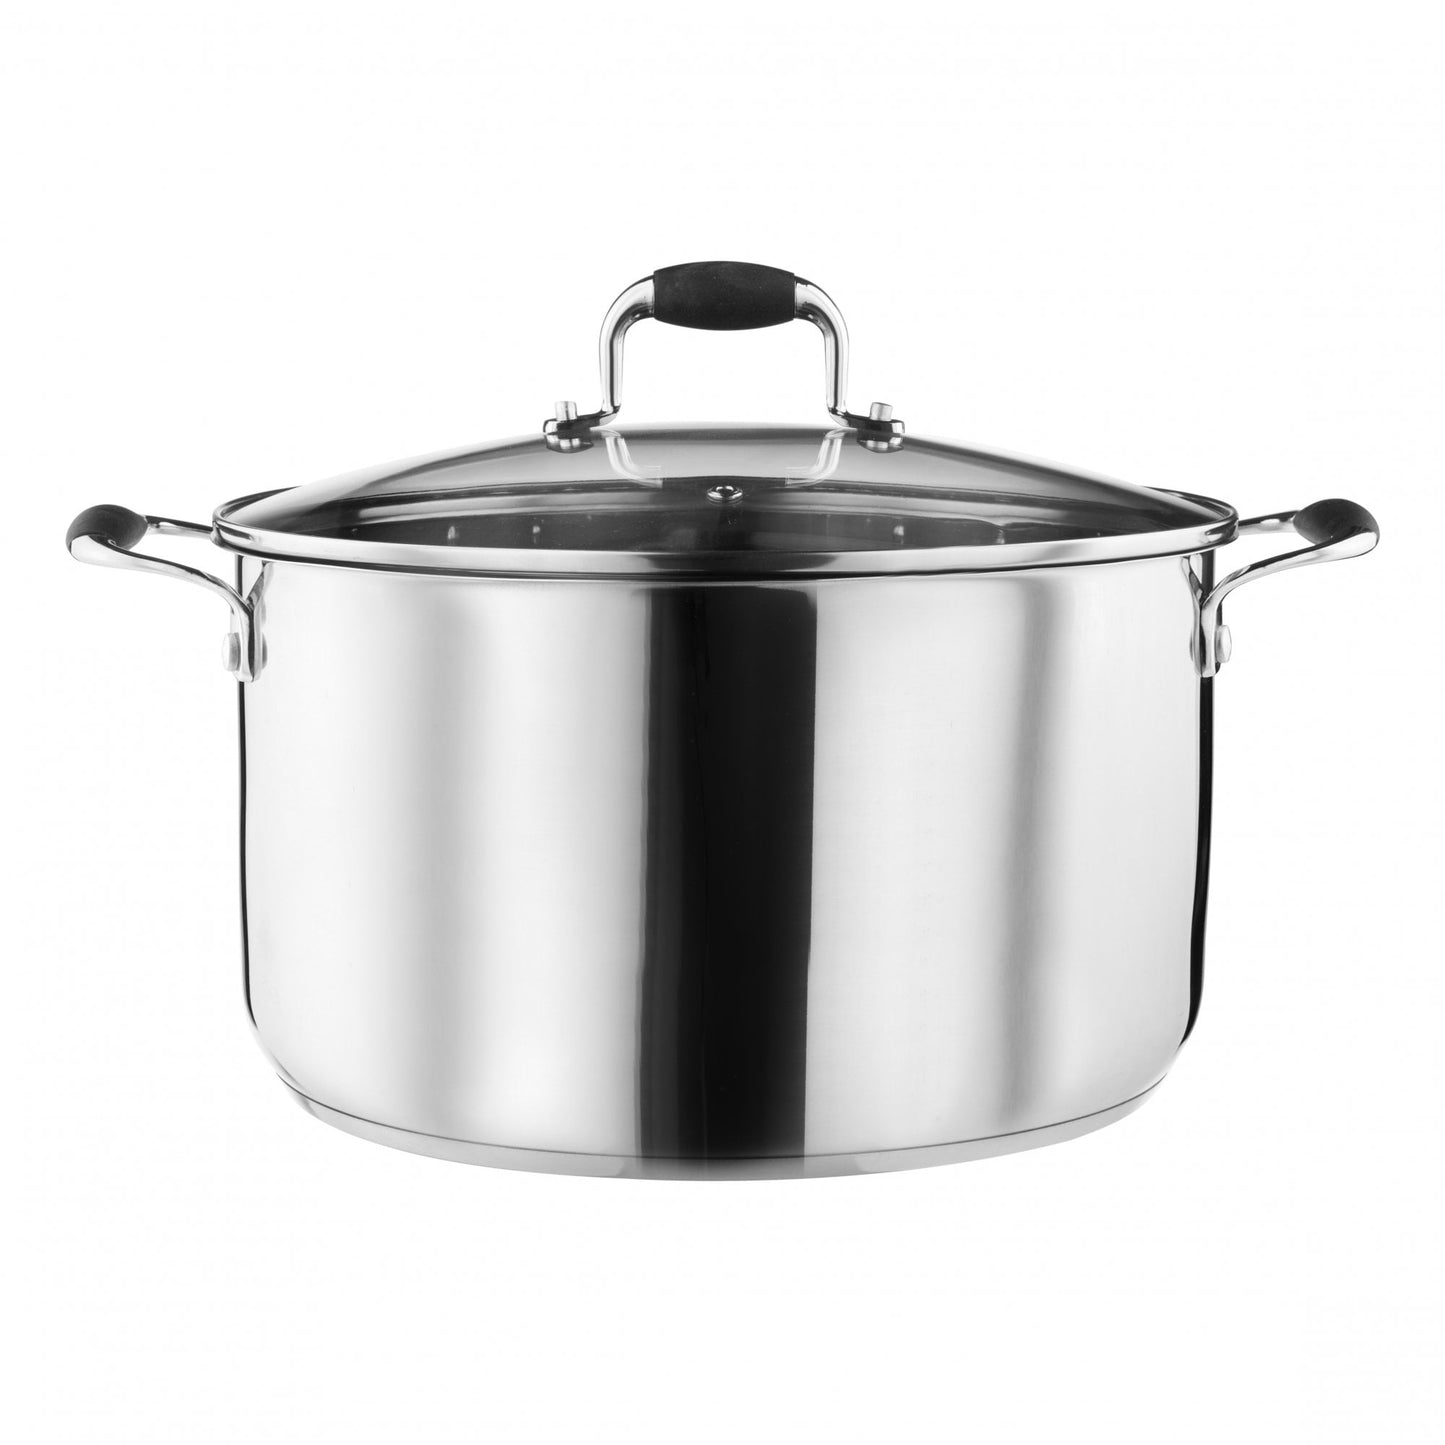 Lewis's Induction Stock Pot With Stainless Steel Lid (Silver, 28cm)